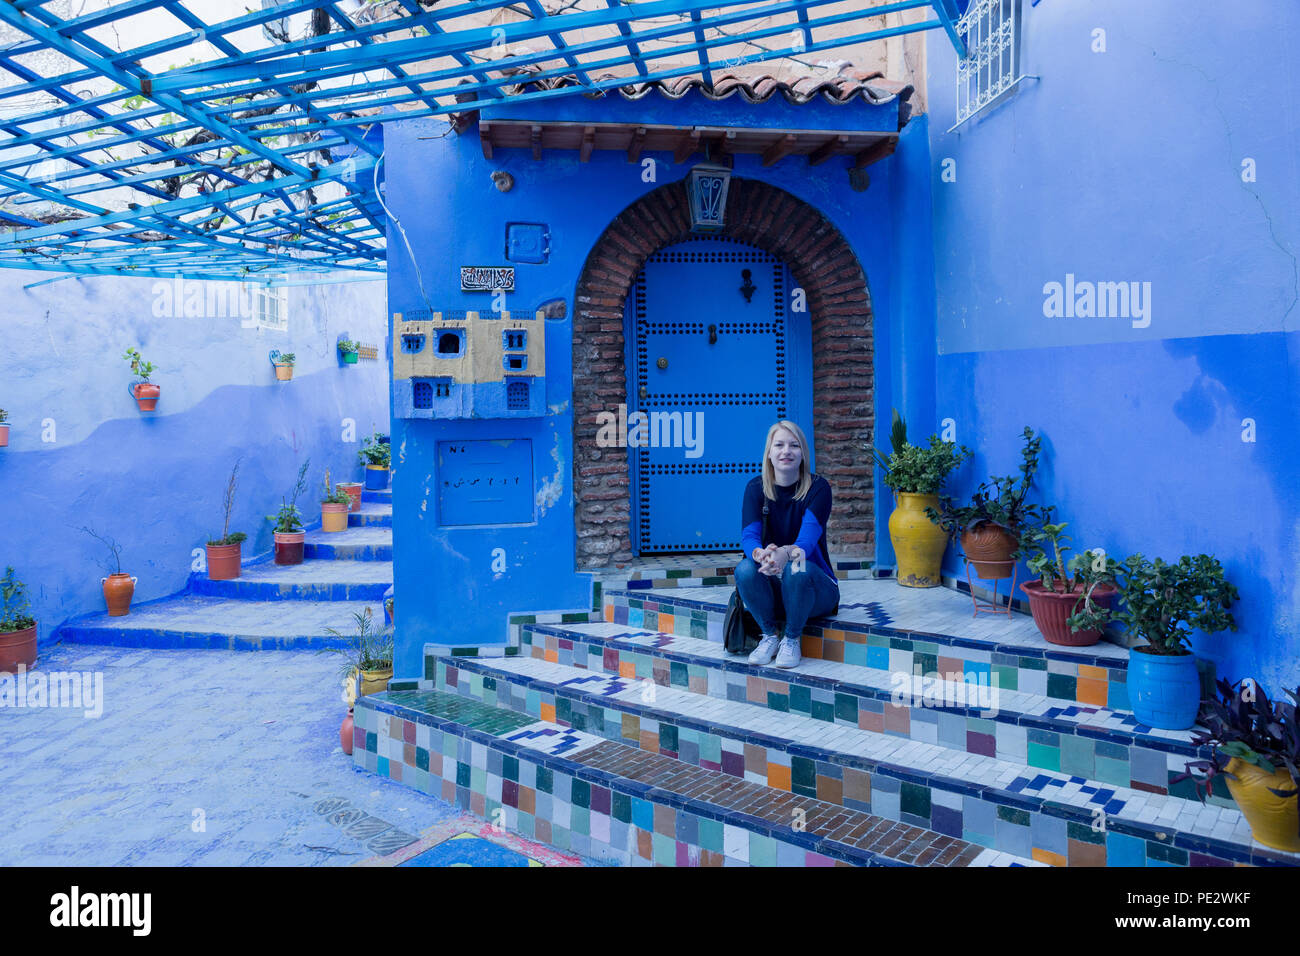 Blond girl is visiting in Chefchaouen (Chaouen) city in Morocco noted for its buildings in shades of blue. Stock Photo